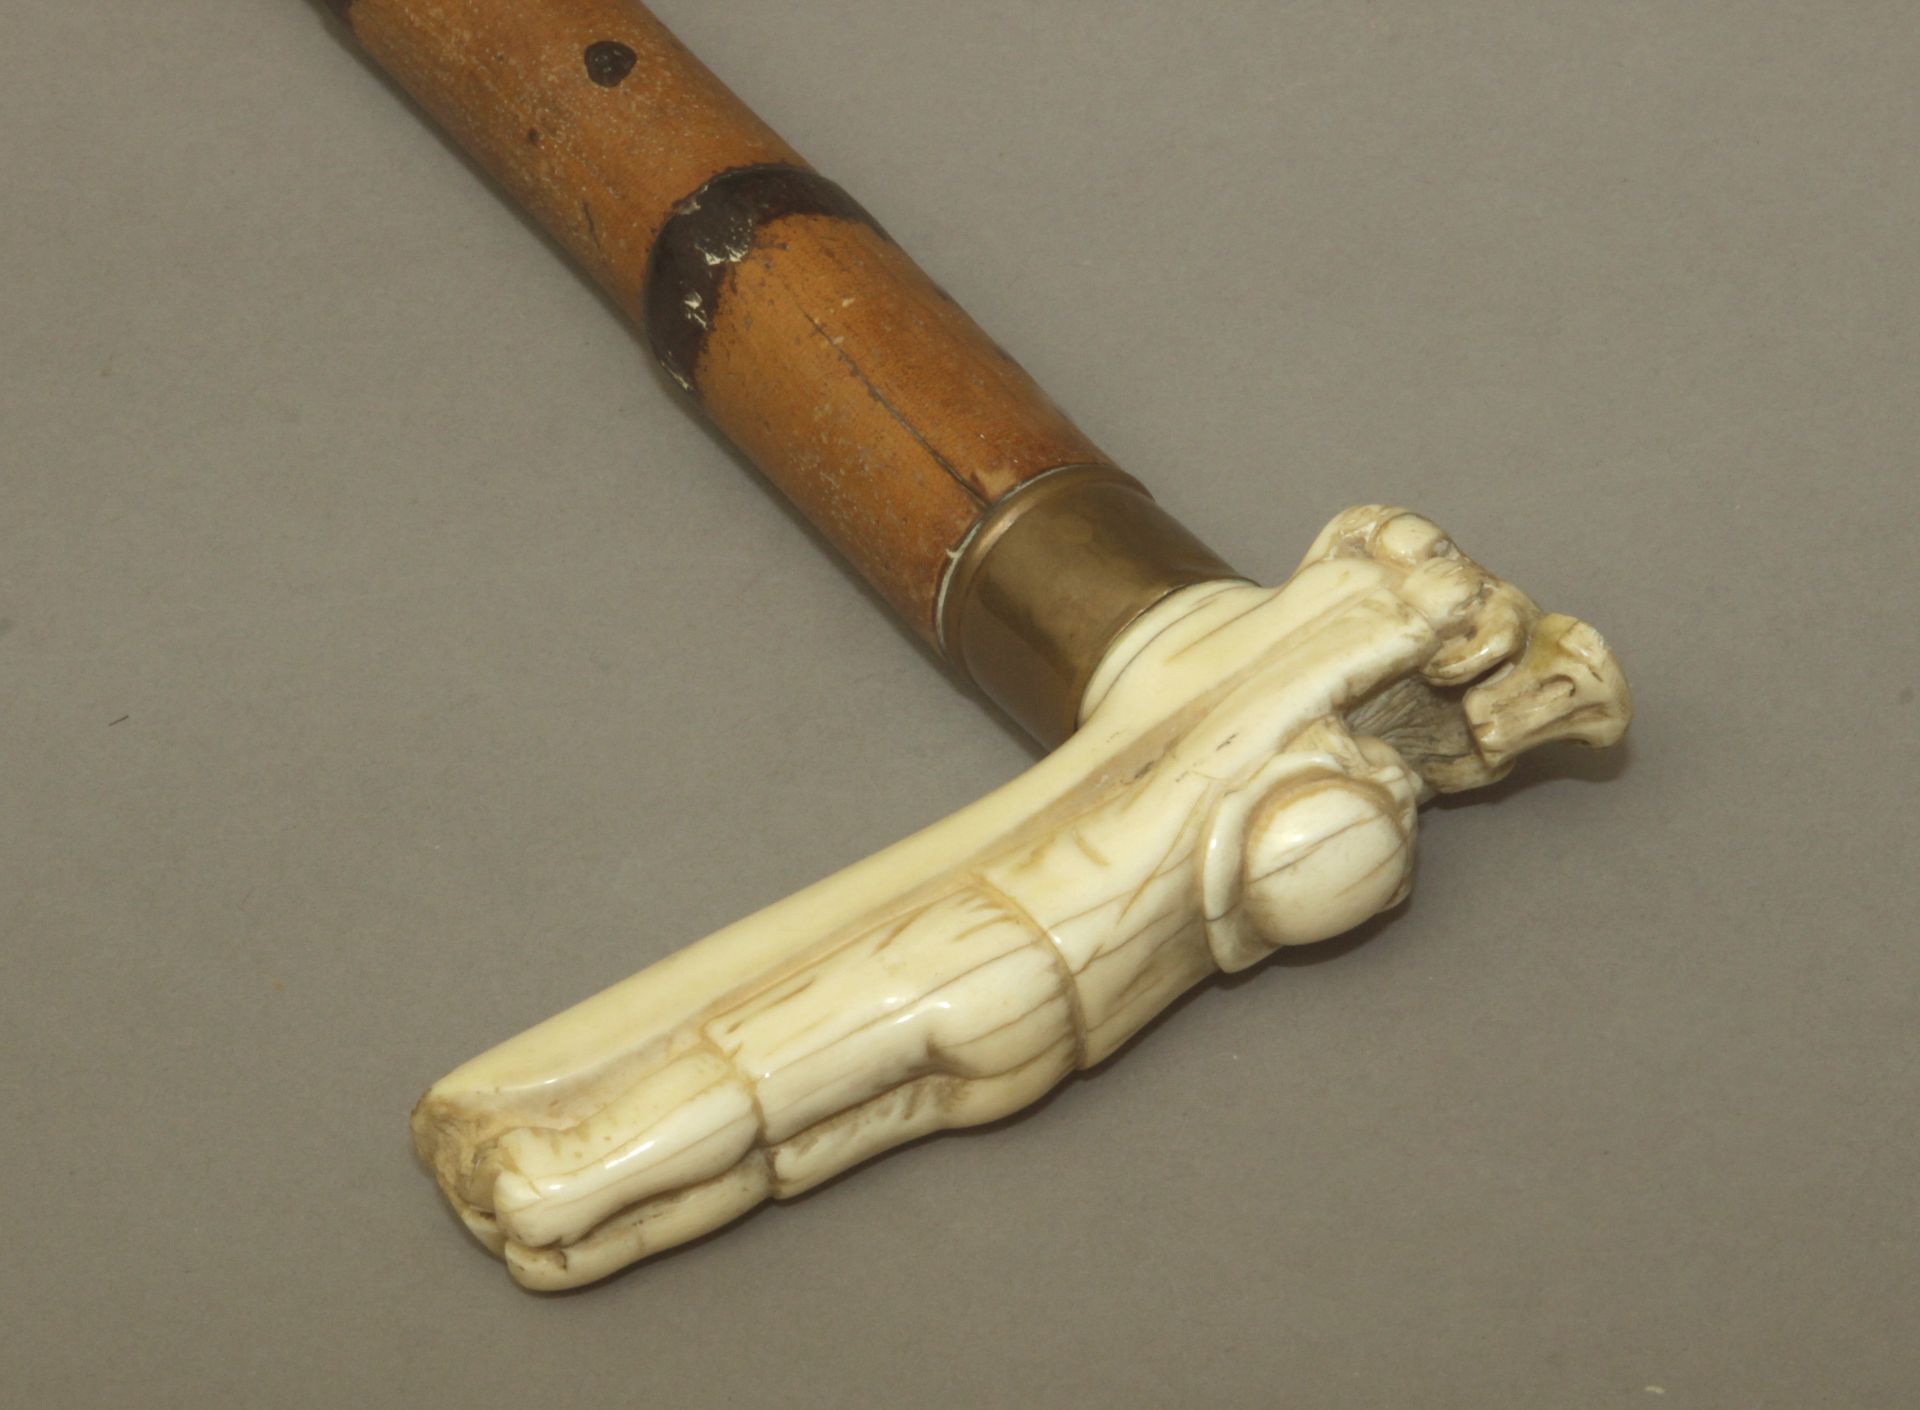 An ivory handled walking cane, Central Europe, 19th century - Image 5 of 8